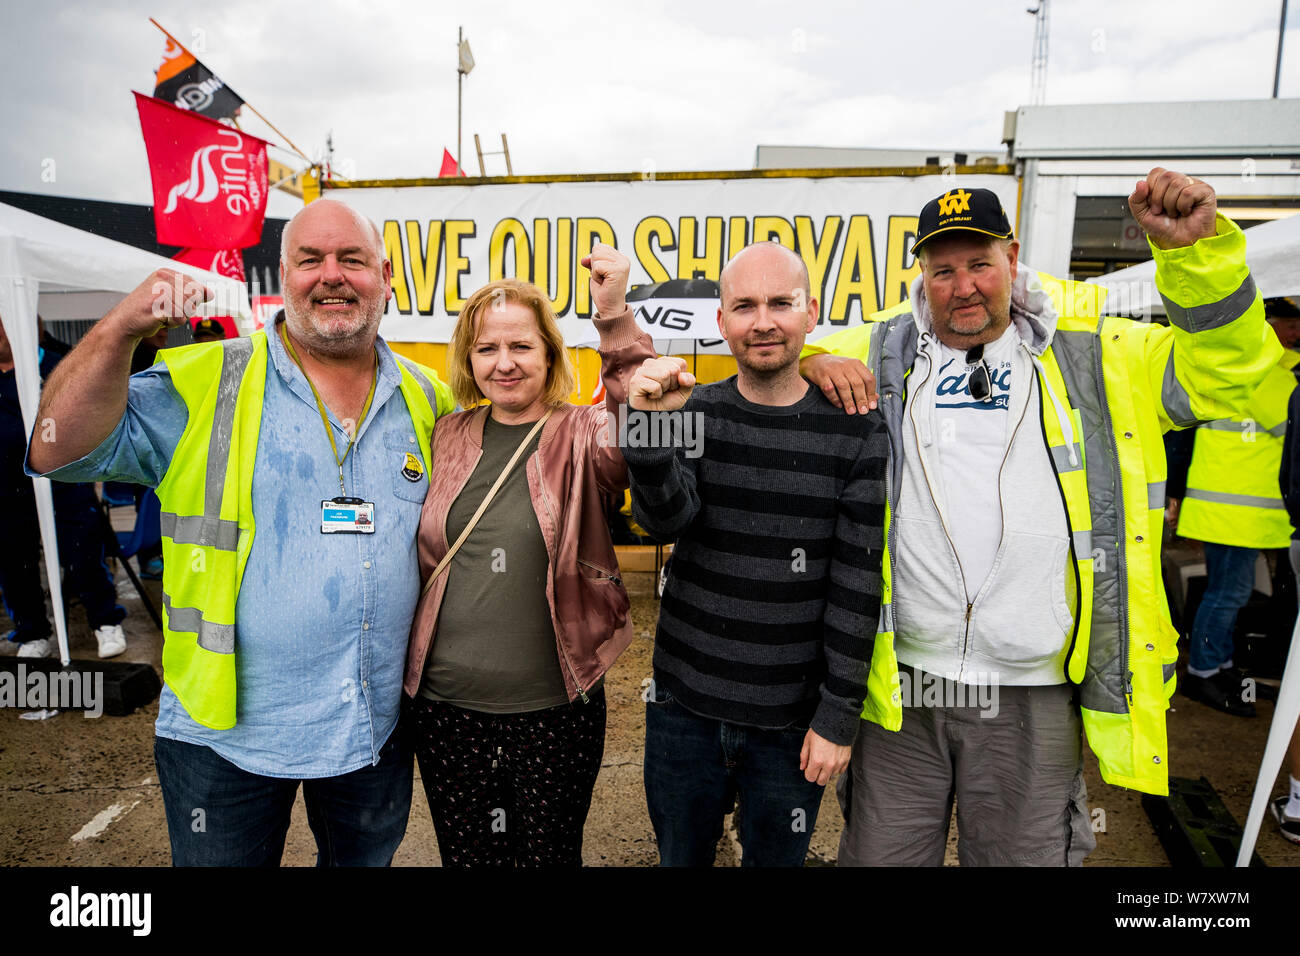 (left to right) Harland and Wolff steel worker Joe Passmore, Irish Solidarity TDs Ruth Coppinger and Paul Murphy, and Harland and Wolff steel worker Barry Reid, standing at the gates of Harland and Wolff shipyard, Belfast, in support of the workers who are calling for the shipyard to be renationalised, as there has been deluge of support from donations of suncream and food to performances by local celebrities. Stock Photo